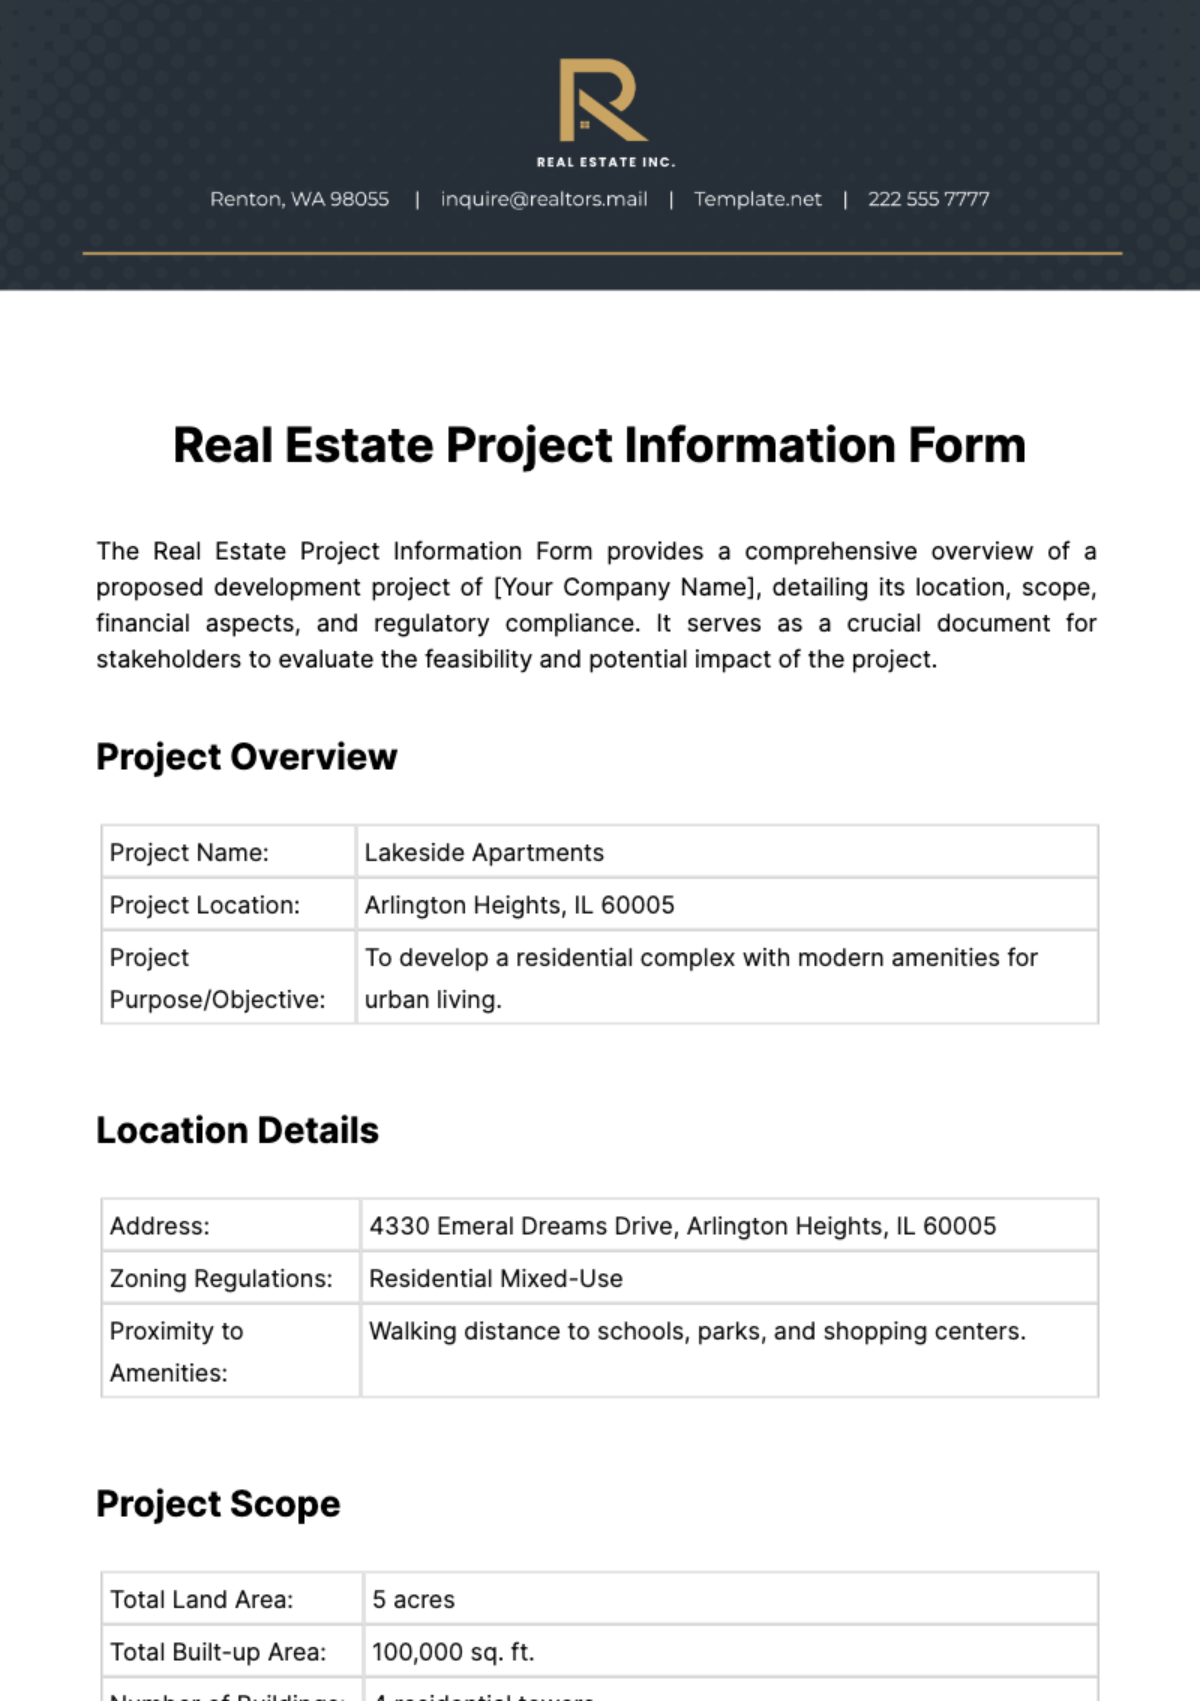 Real Estate Project Information Form Template